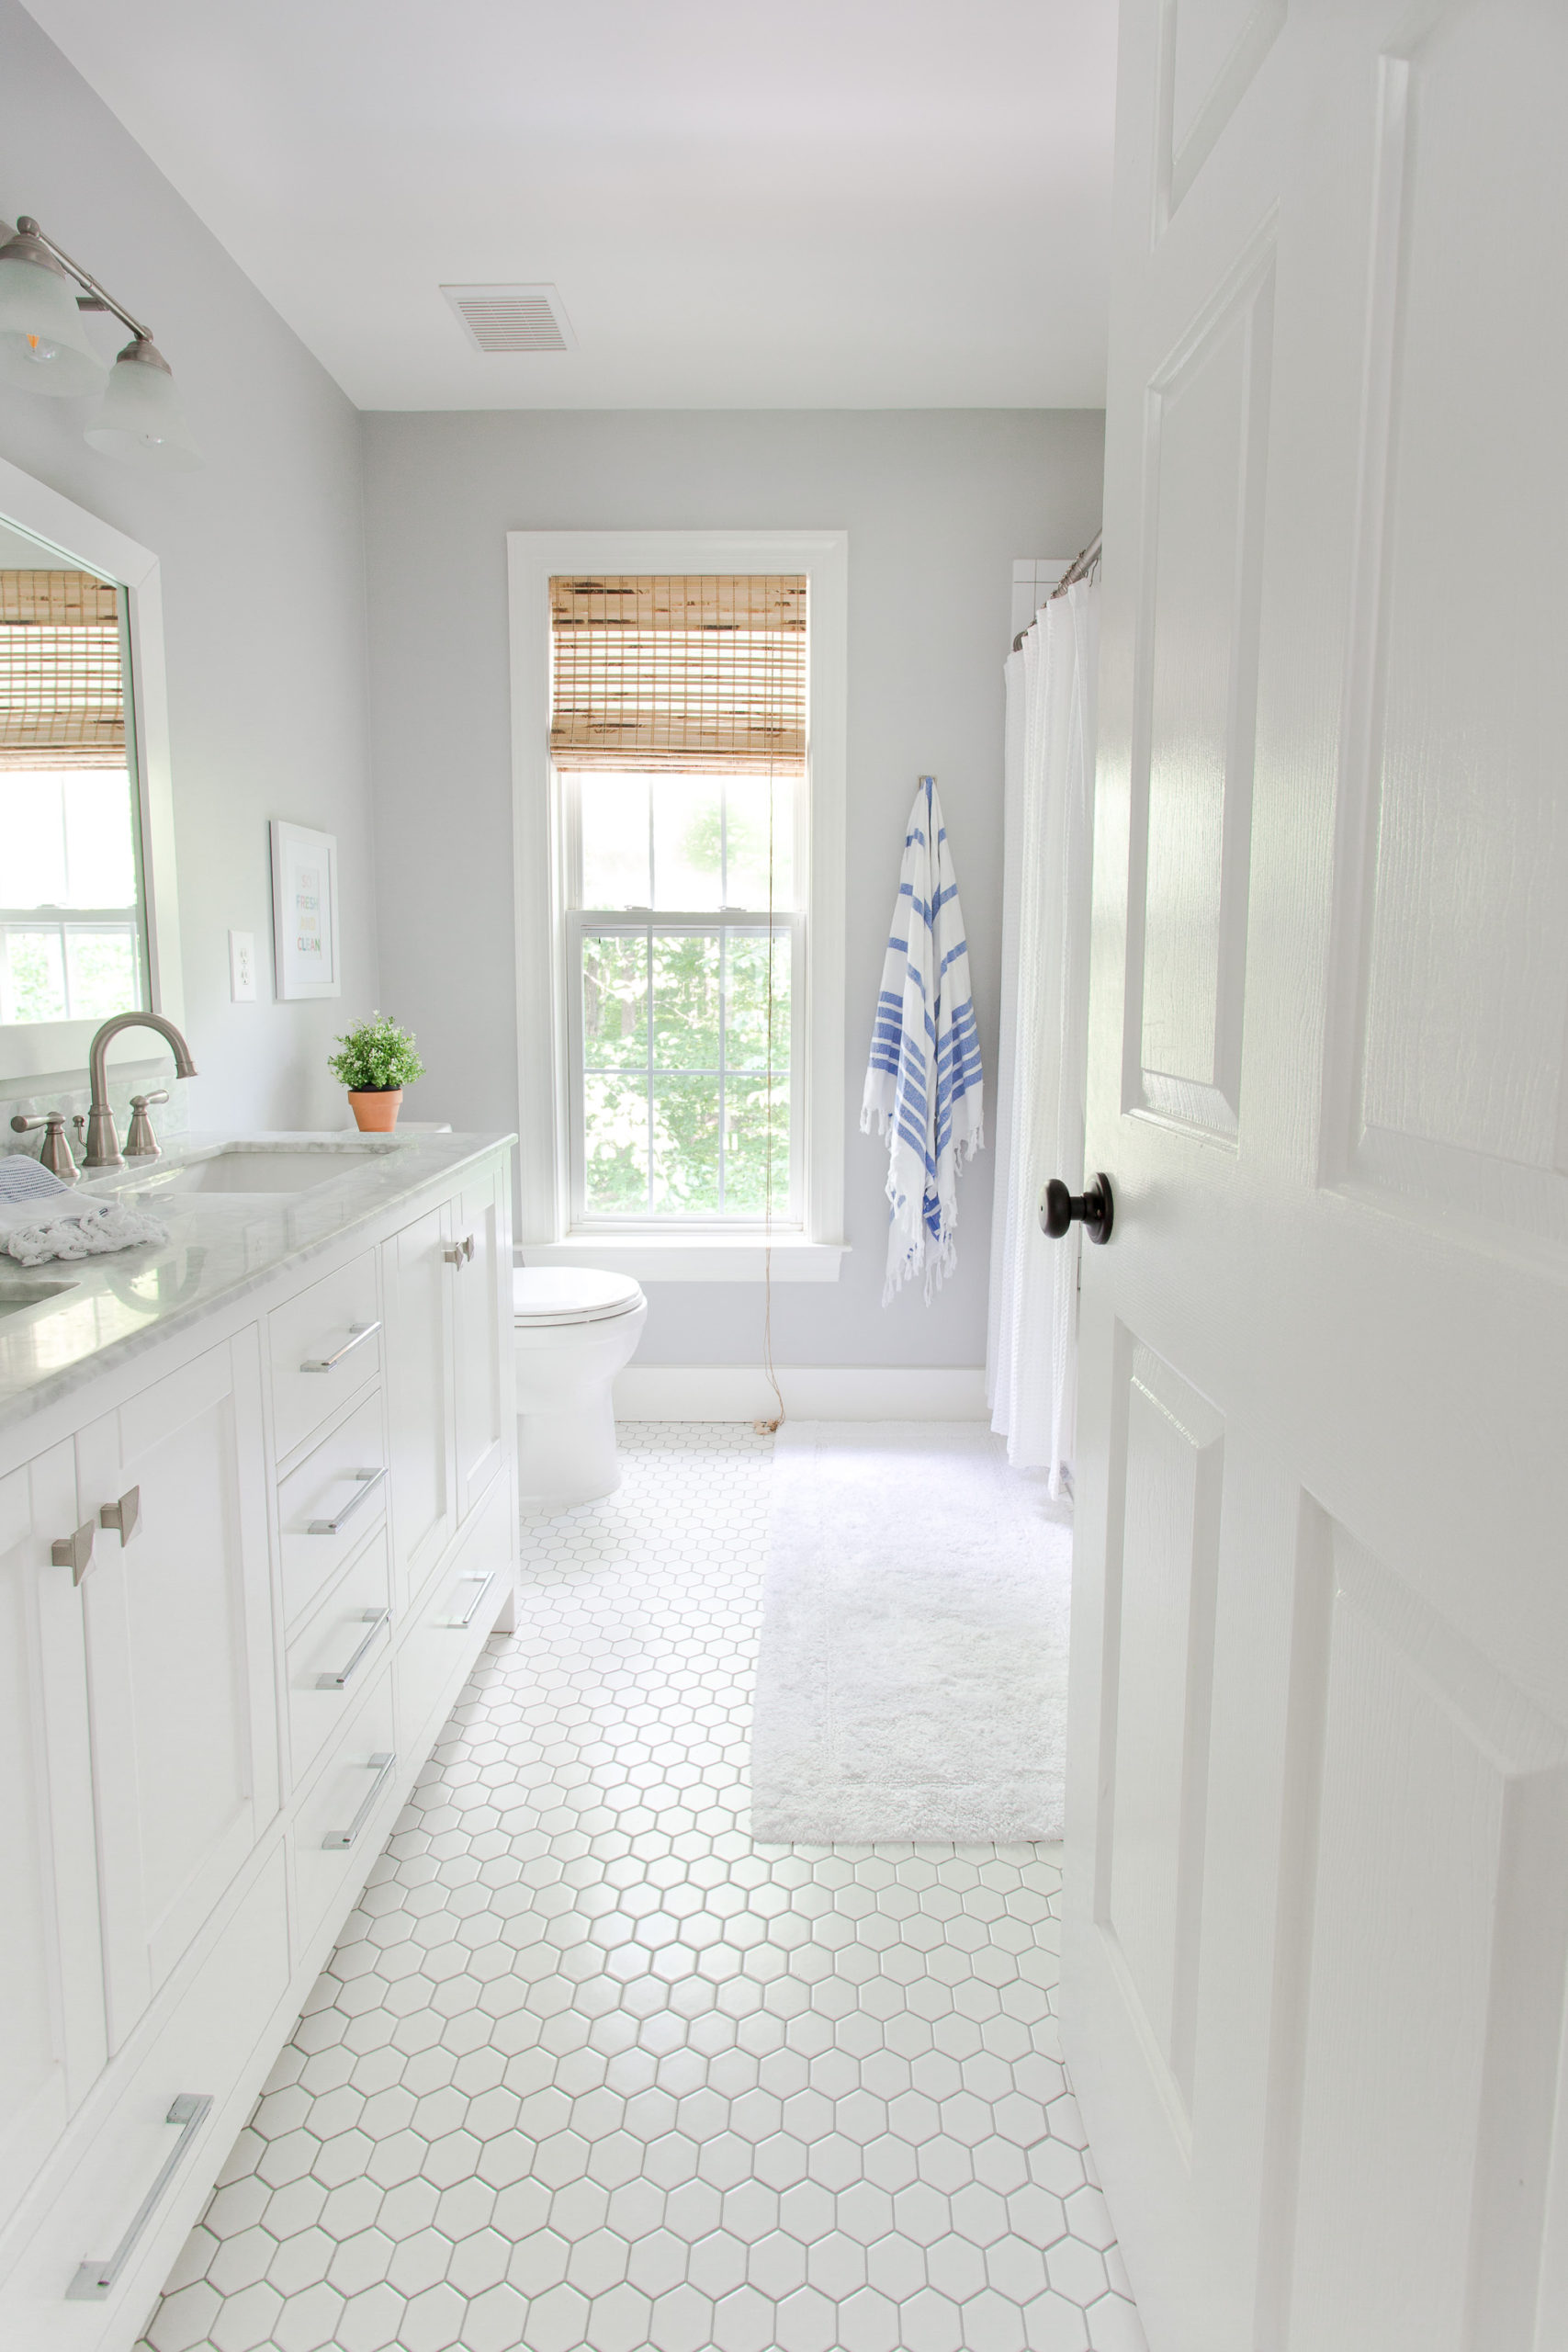 Door open to white bathroom with gray walls, cabinet with two sinks and a blue and white stripe towel hanging on the wall